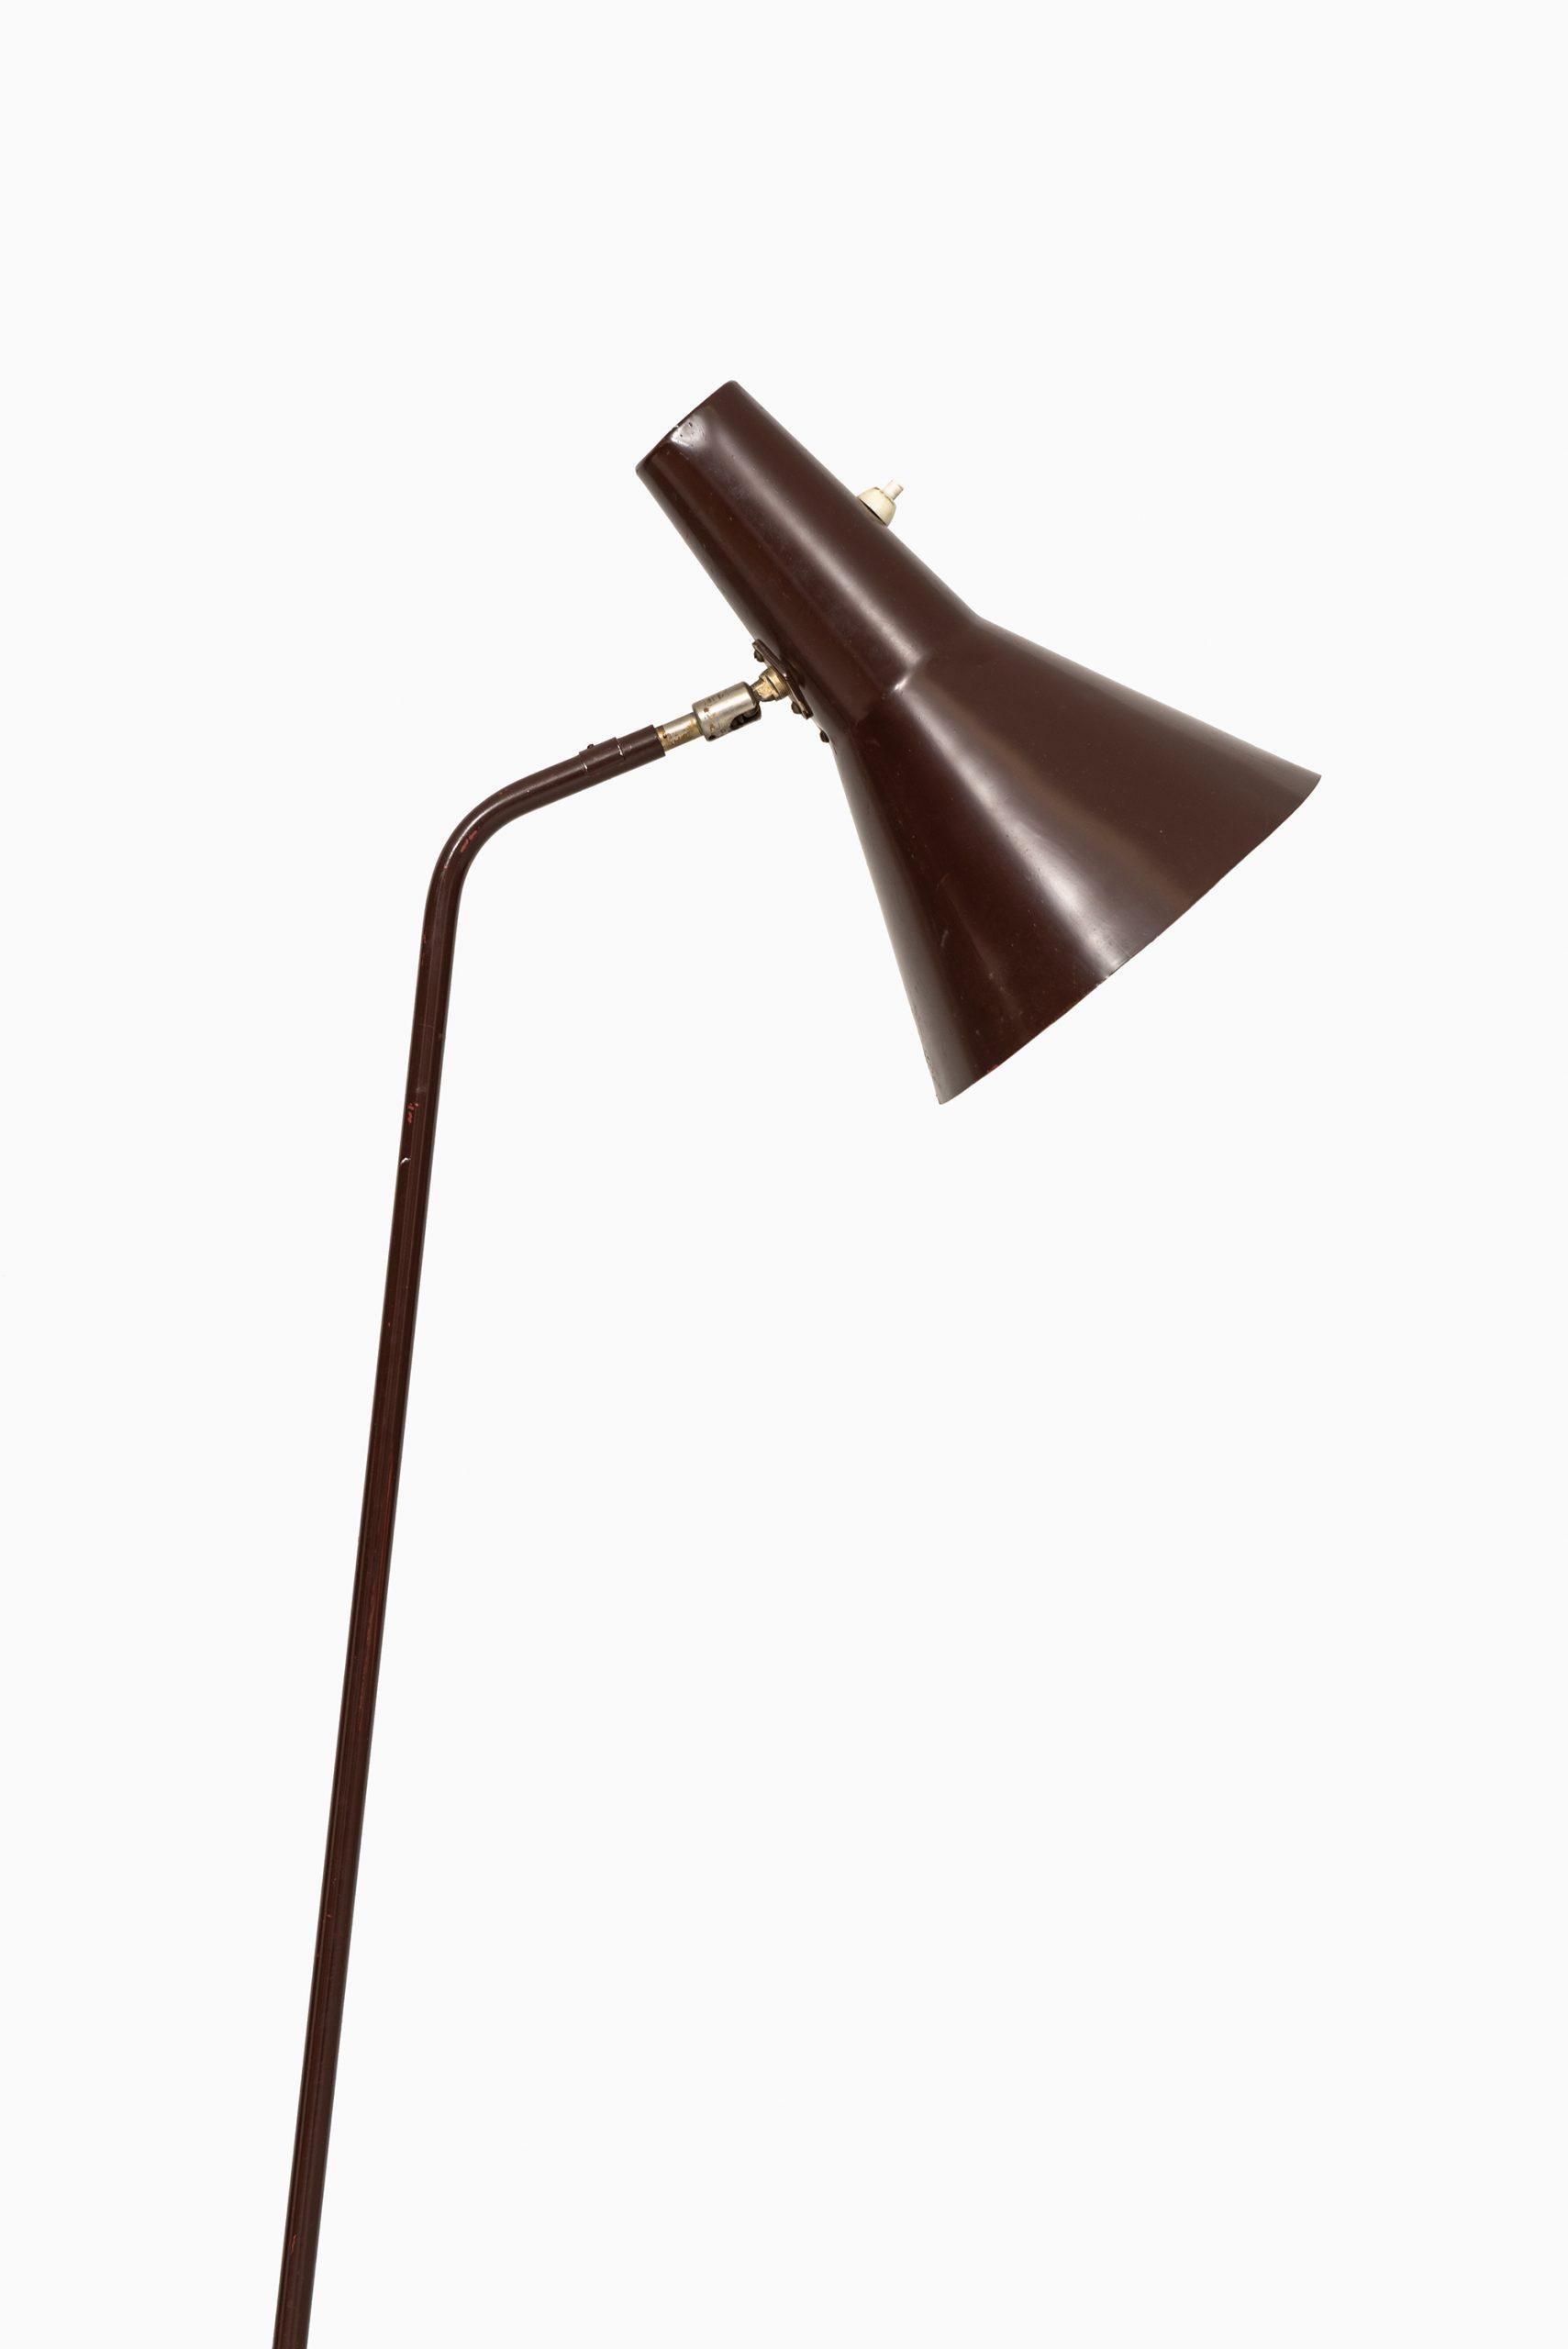 Floor lamp by unknown designer. Produced by ASEA in Sweden.